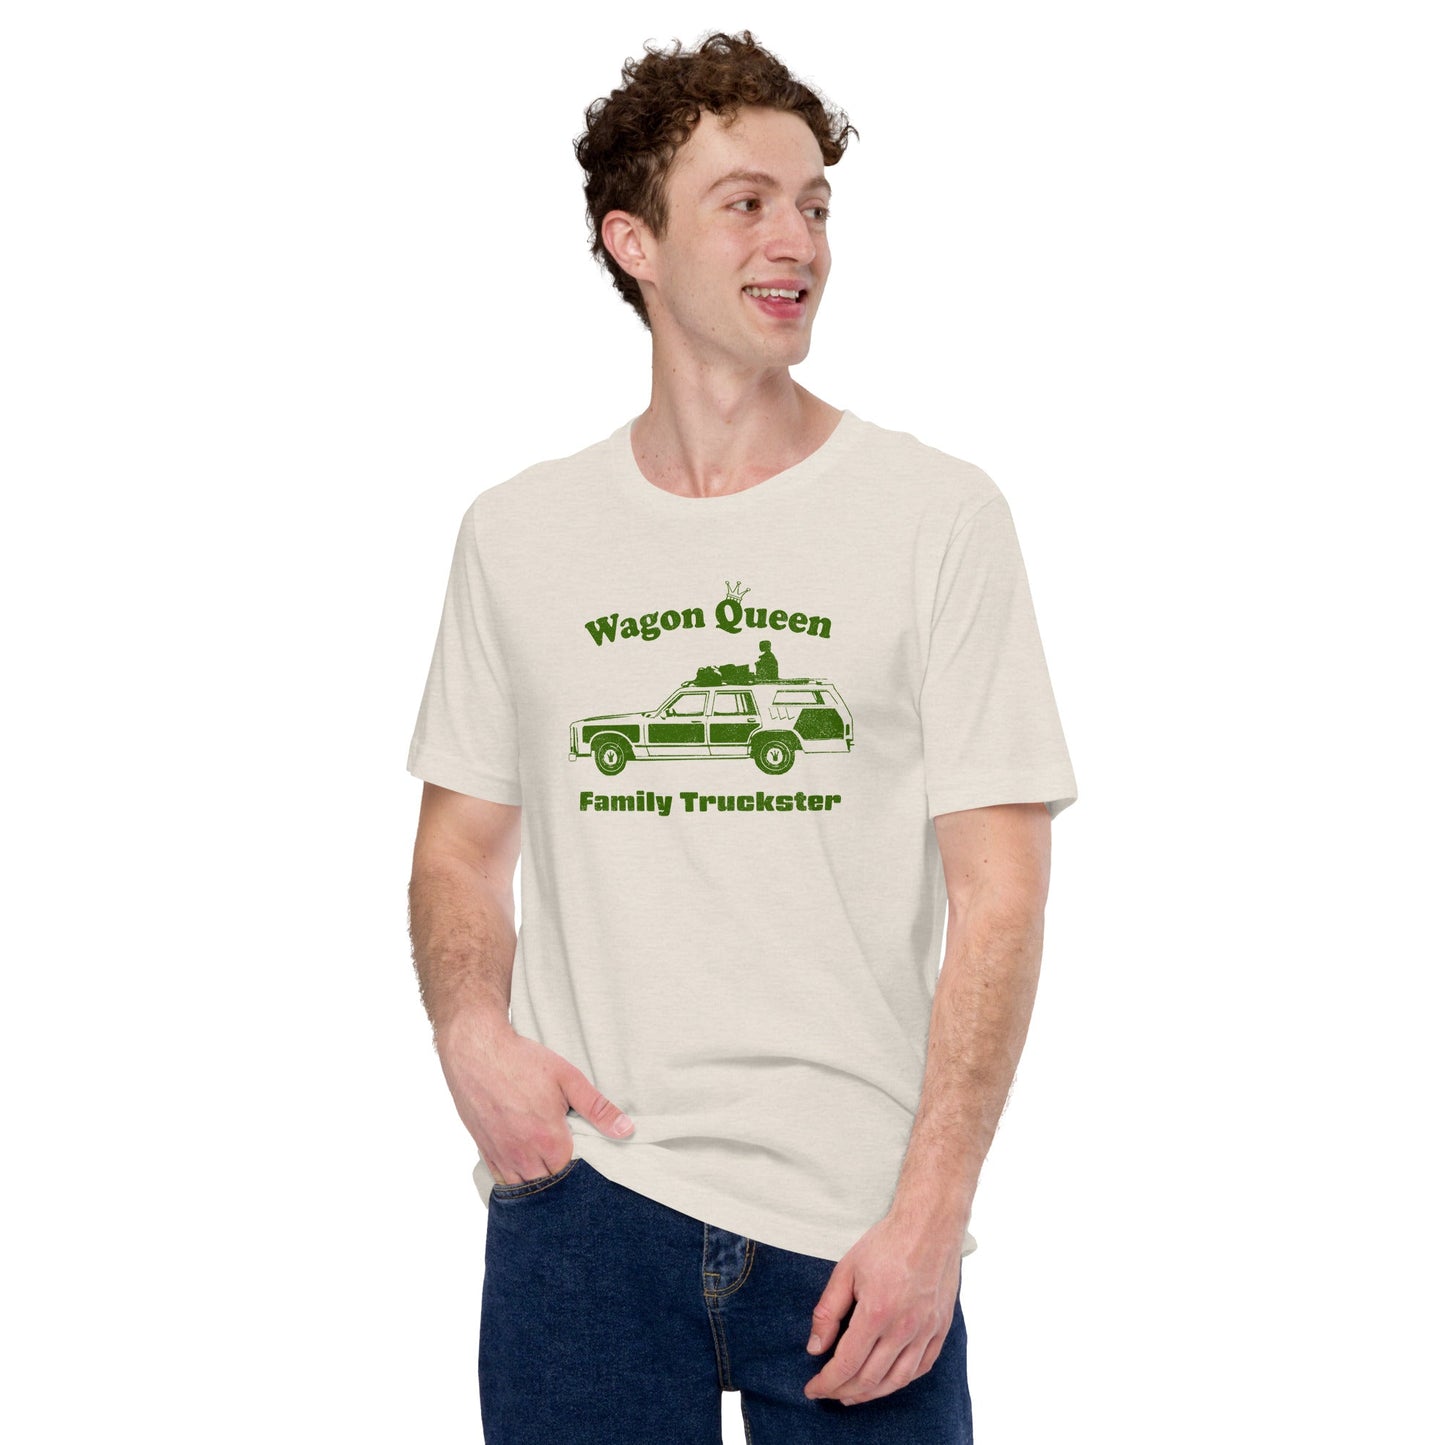 Family Truckster T-Shirt - Wagon Queen | Vacation Classic 80s movie